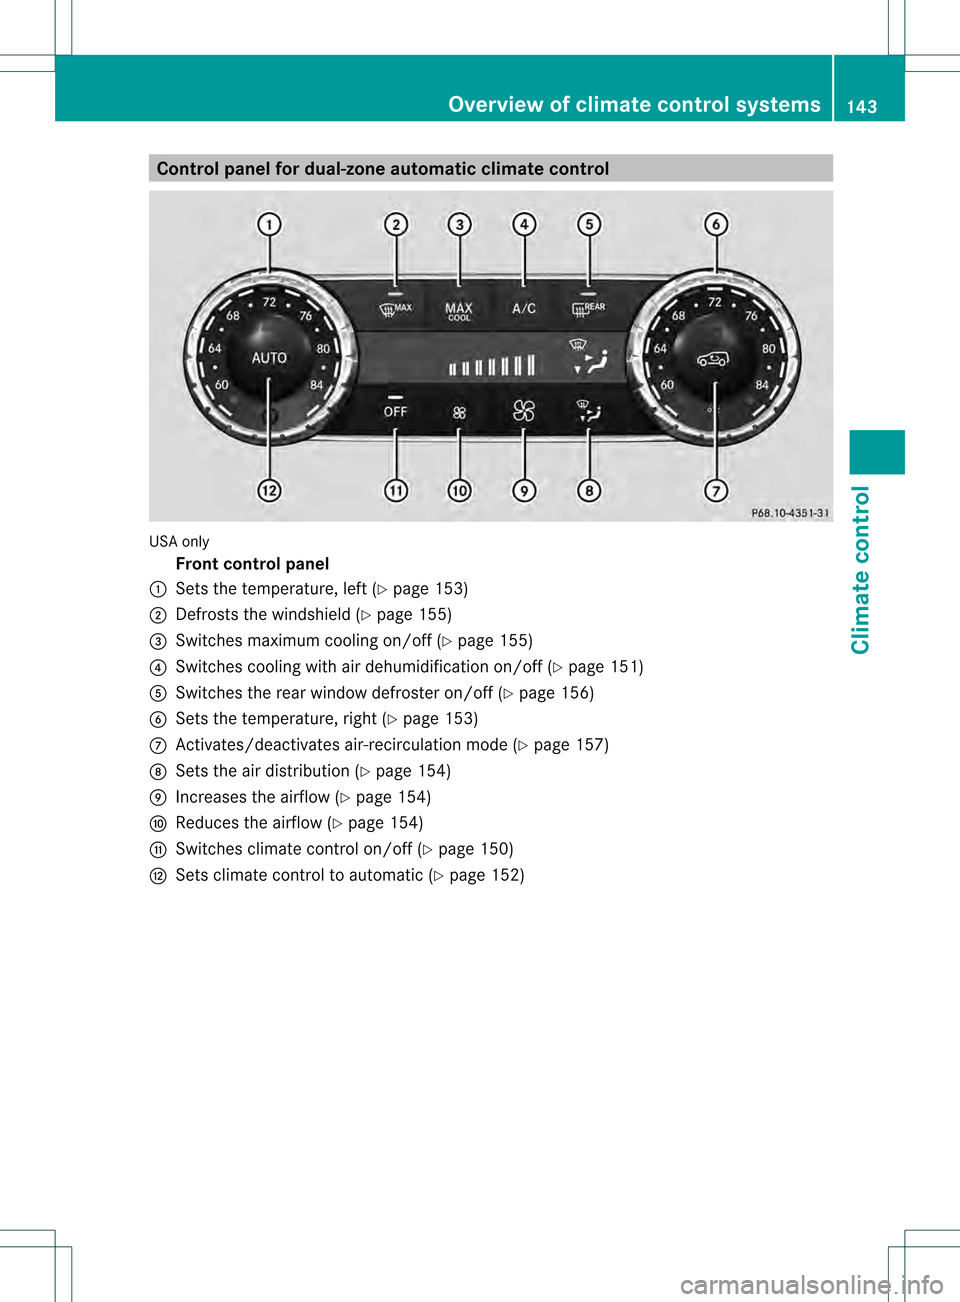 MERCEDES-BENZ GL-Class 2013 X166 Owners Manual Control panel for dual-zone automatic climate control
USA only
Fron tcontrol panel
0002 Sets the temperature, left (Y page 153)
0003 Defrosts the windshield (Y page 155)
0021 Switches maximum cooling 